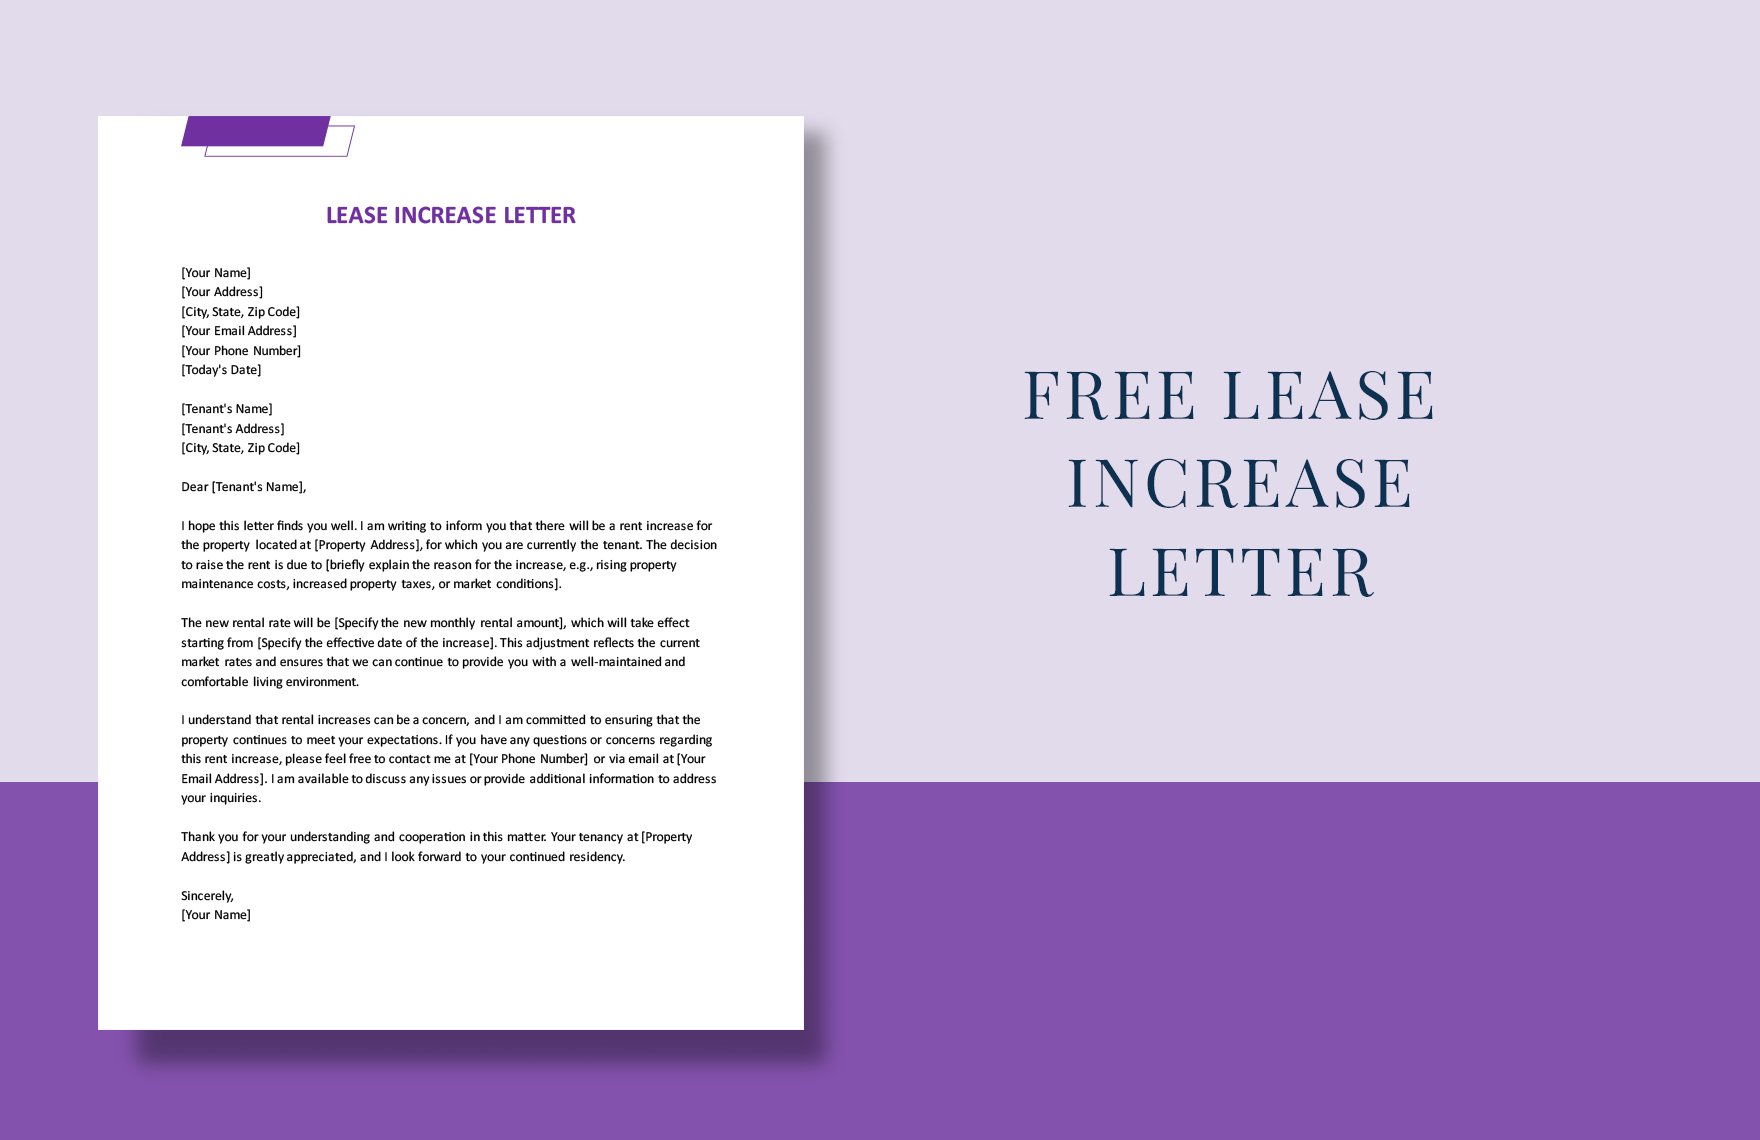 Lease Increase Letter in Word, Google Docs, PDF